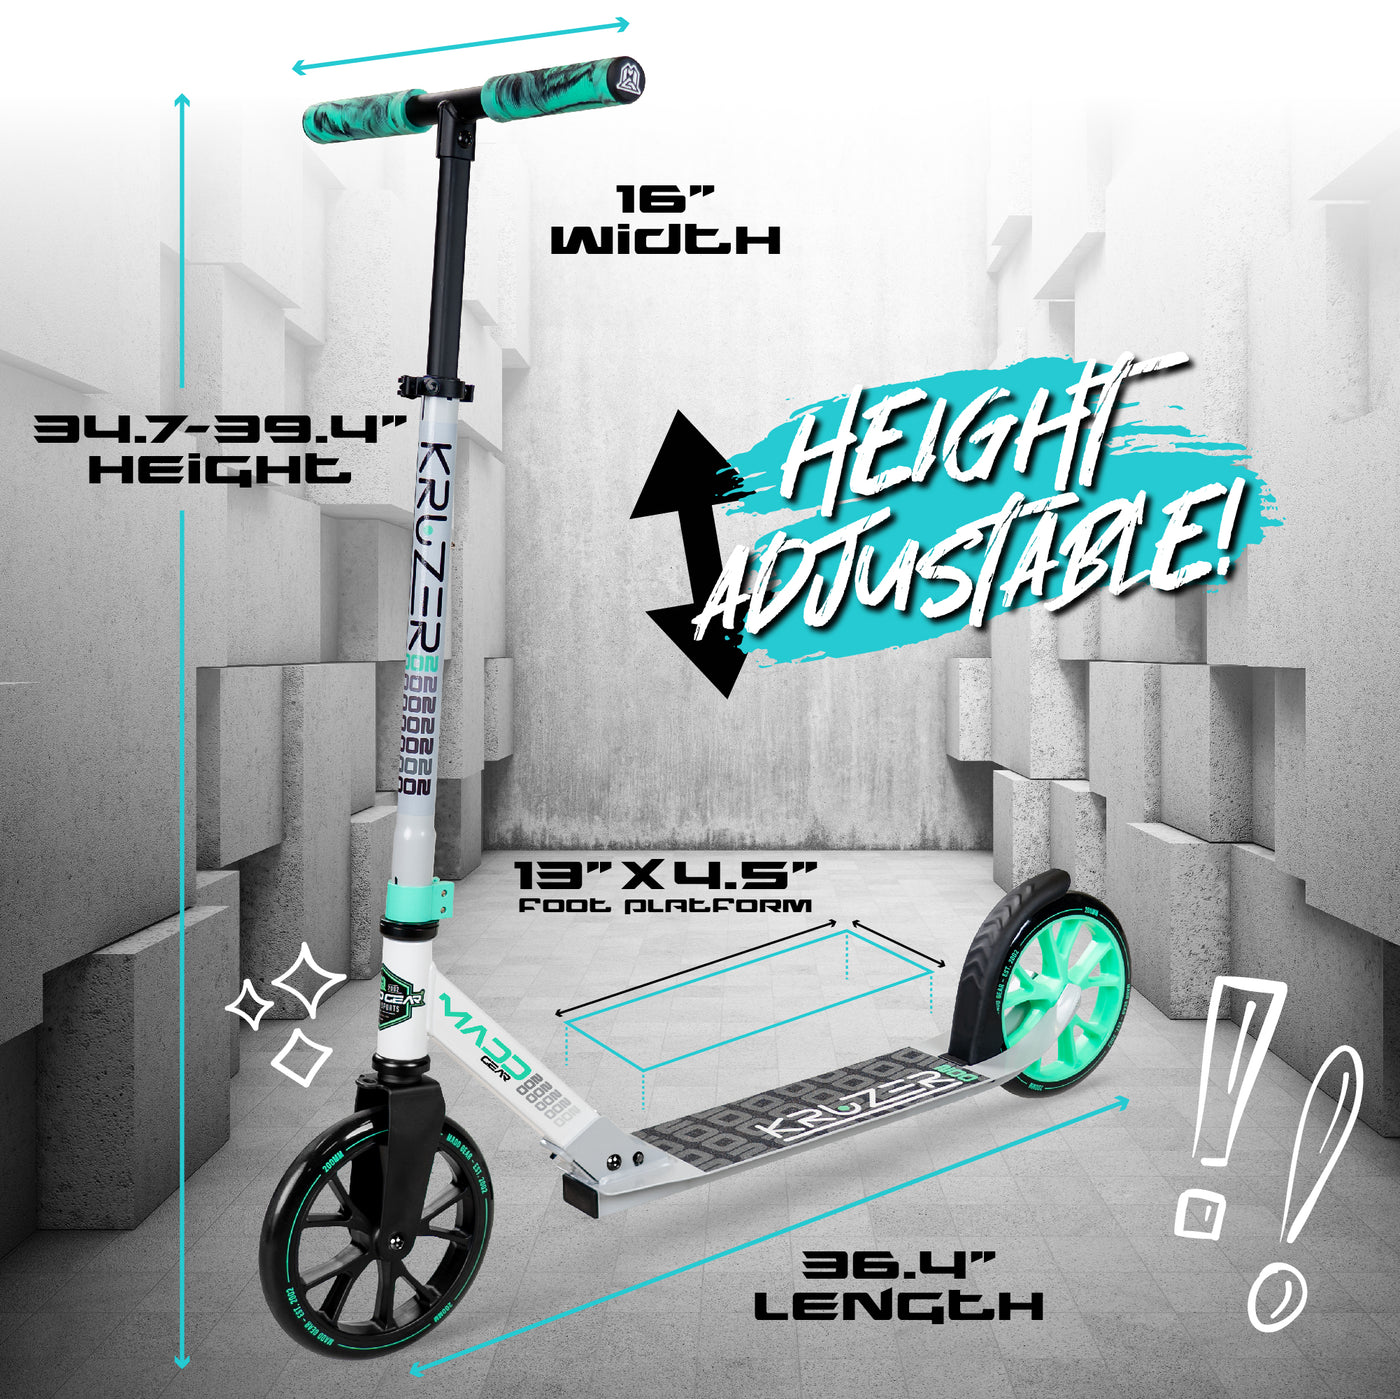 Madd Gear Kruzer White Gray Teal 200mm Wheel Scooter. Ultra smooth rolling and compact folding action. Adjustable height for riders of all heights.